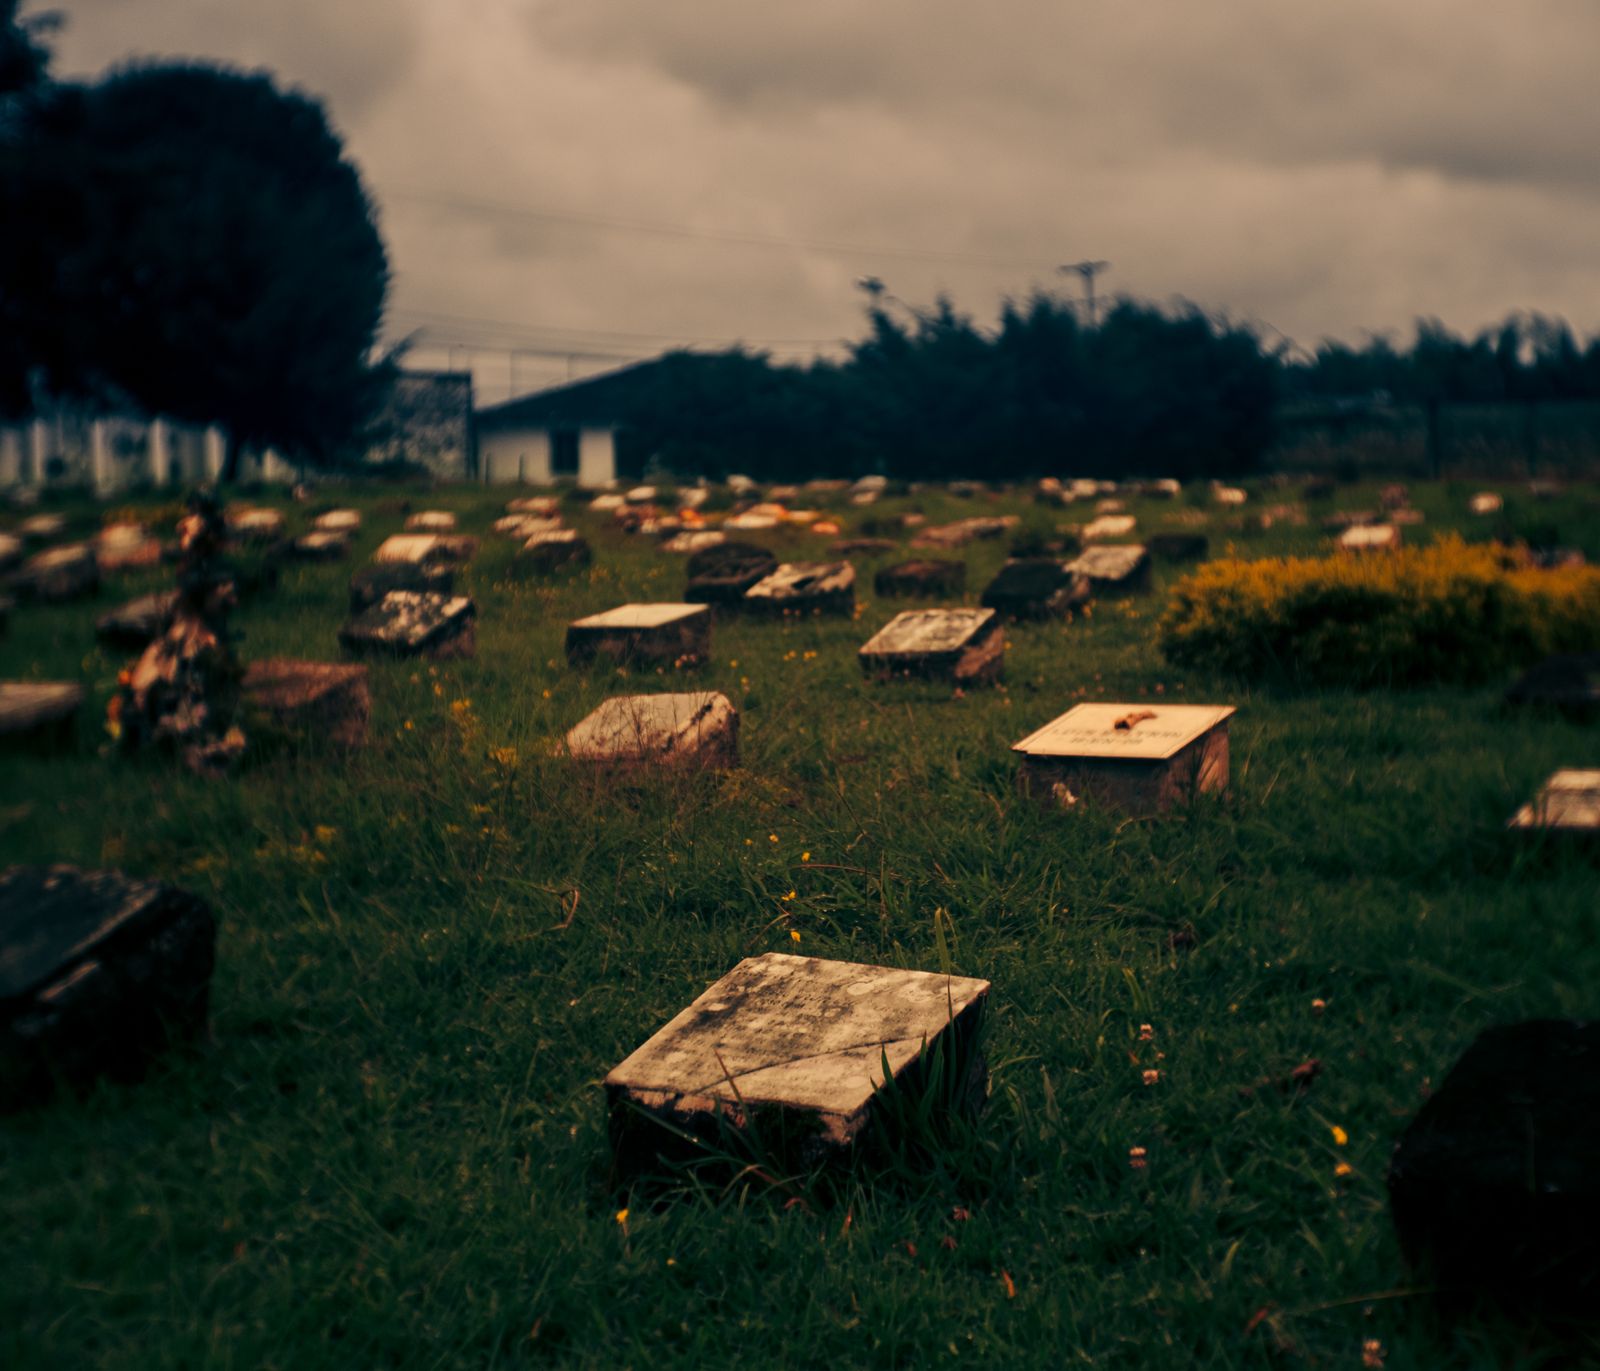 © Jorge Panchoaga - tombs in Popayán, Cauca. One of the most conflicting areas in Colombia.